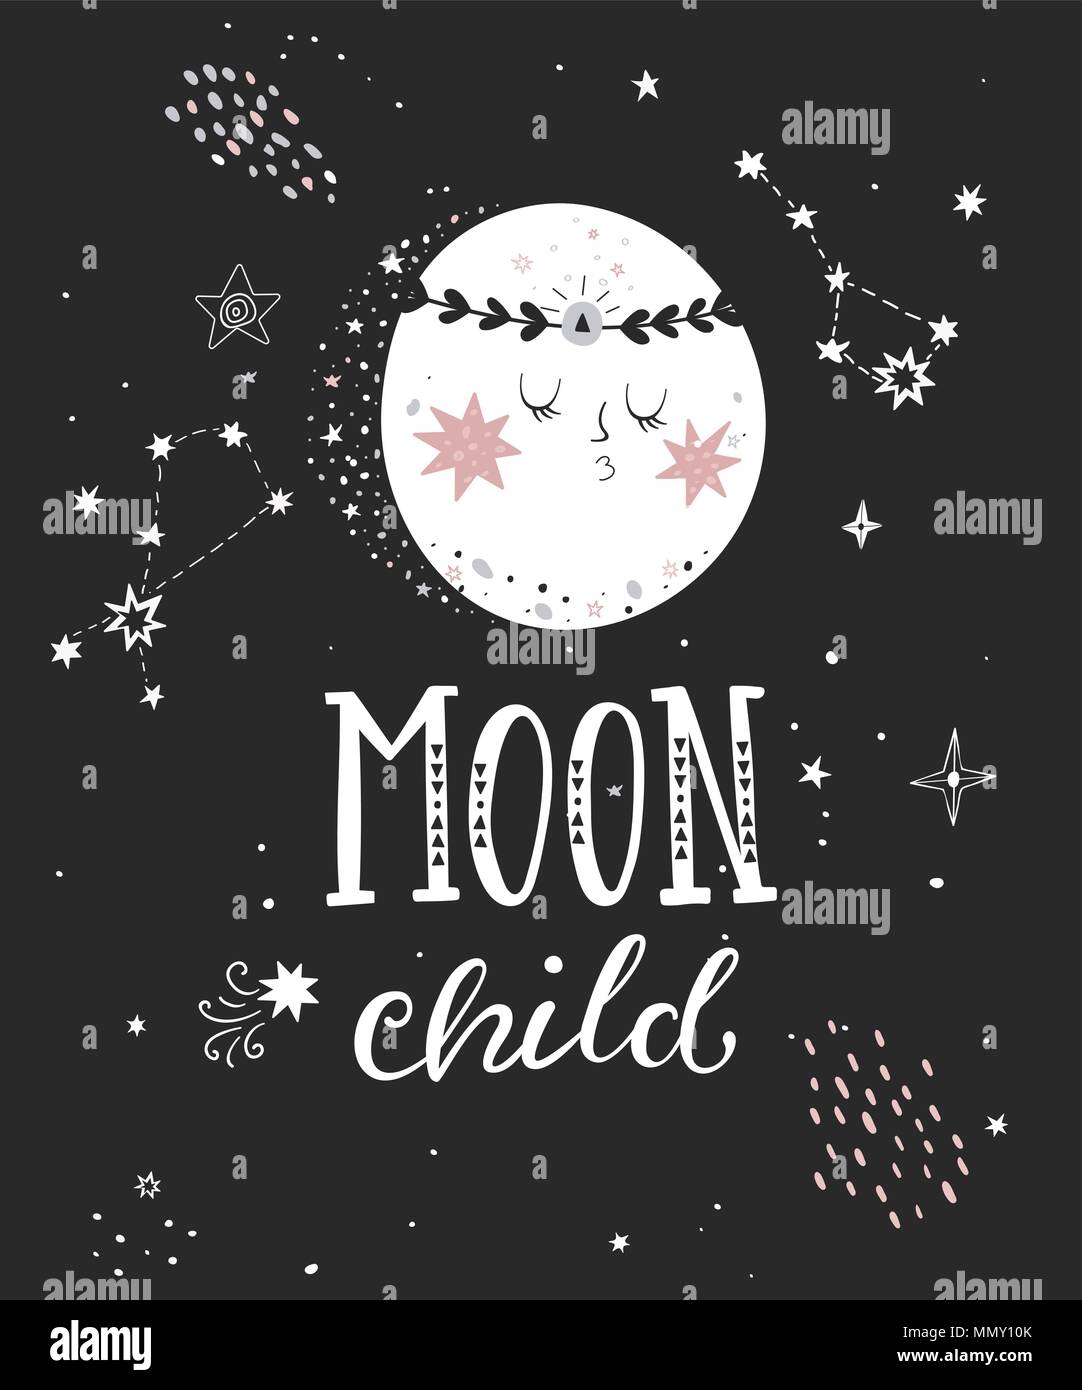 Moon child poster with hand drawn lettering. Vector illustration. Stock Vector